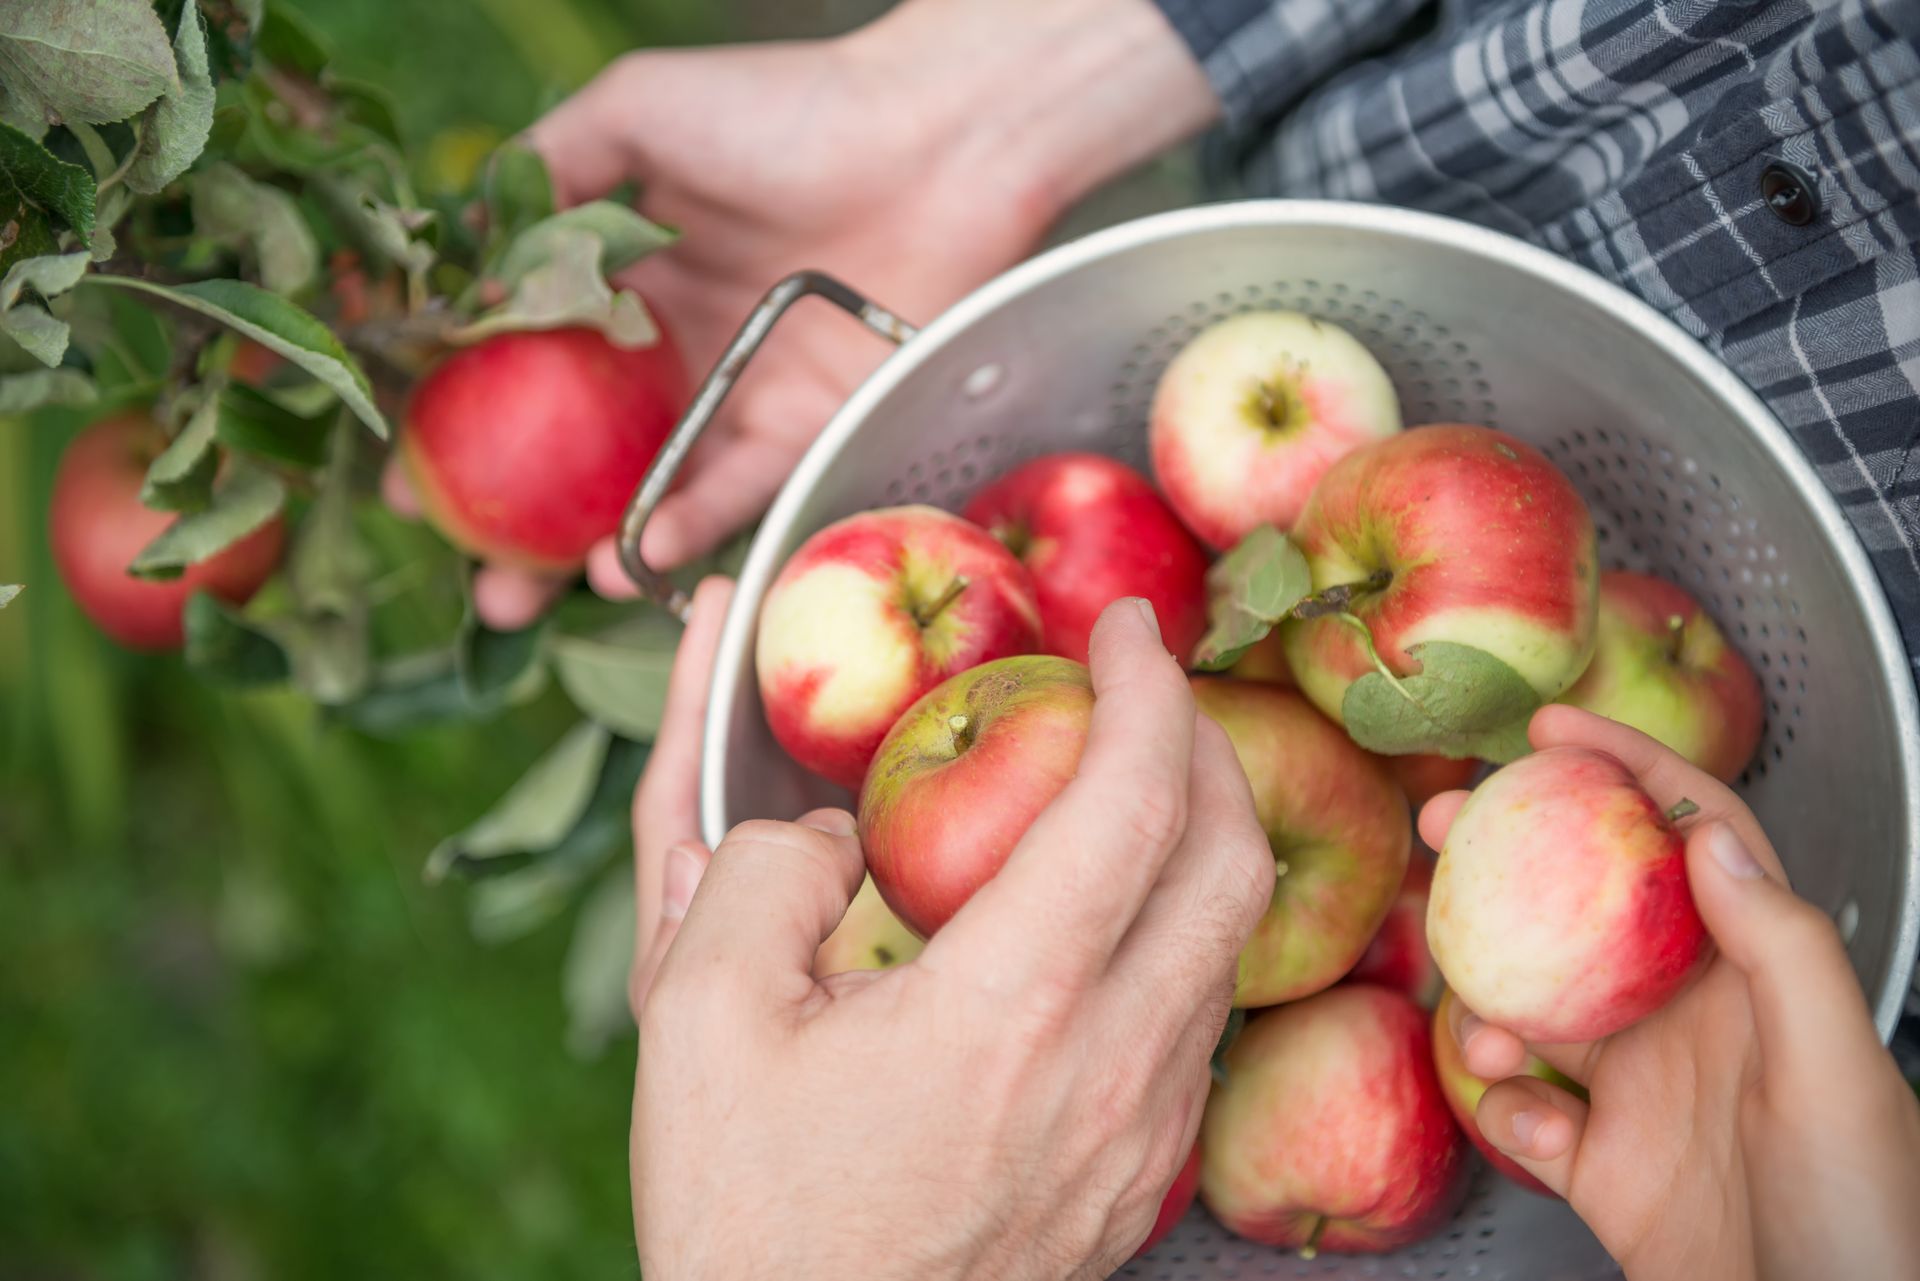 Hands picking red apples and putting them in a bucket